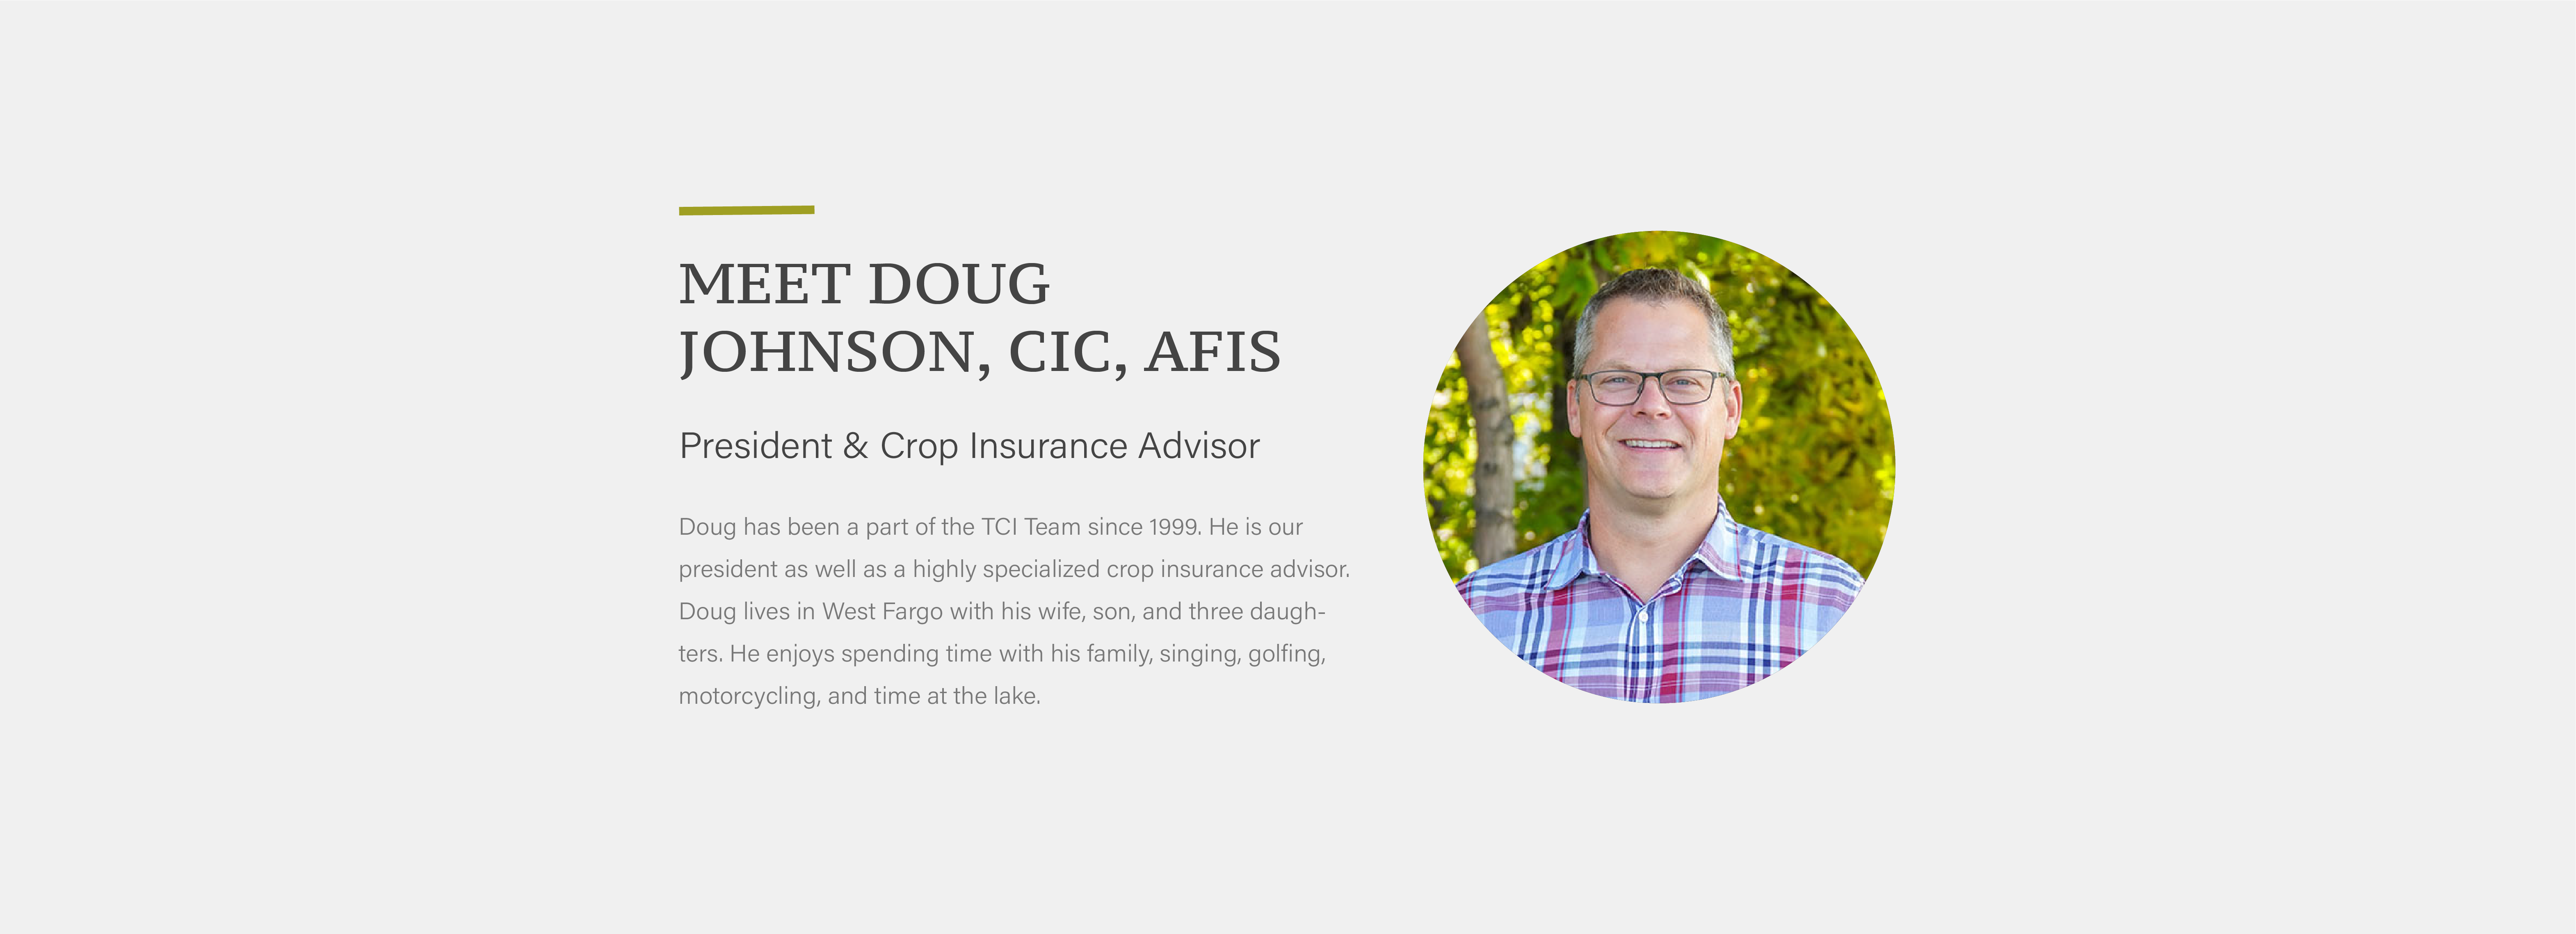 Doug has been a part of the TCI Team since 1999. He is our president as well as a highly specialized crop insurance advisor. Doug lives in West Fargo with his wife, son, and three daughters. He enjoys spending time with his family, singing, golfing, motorcycling, and time at the lake.